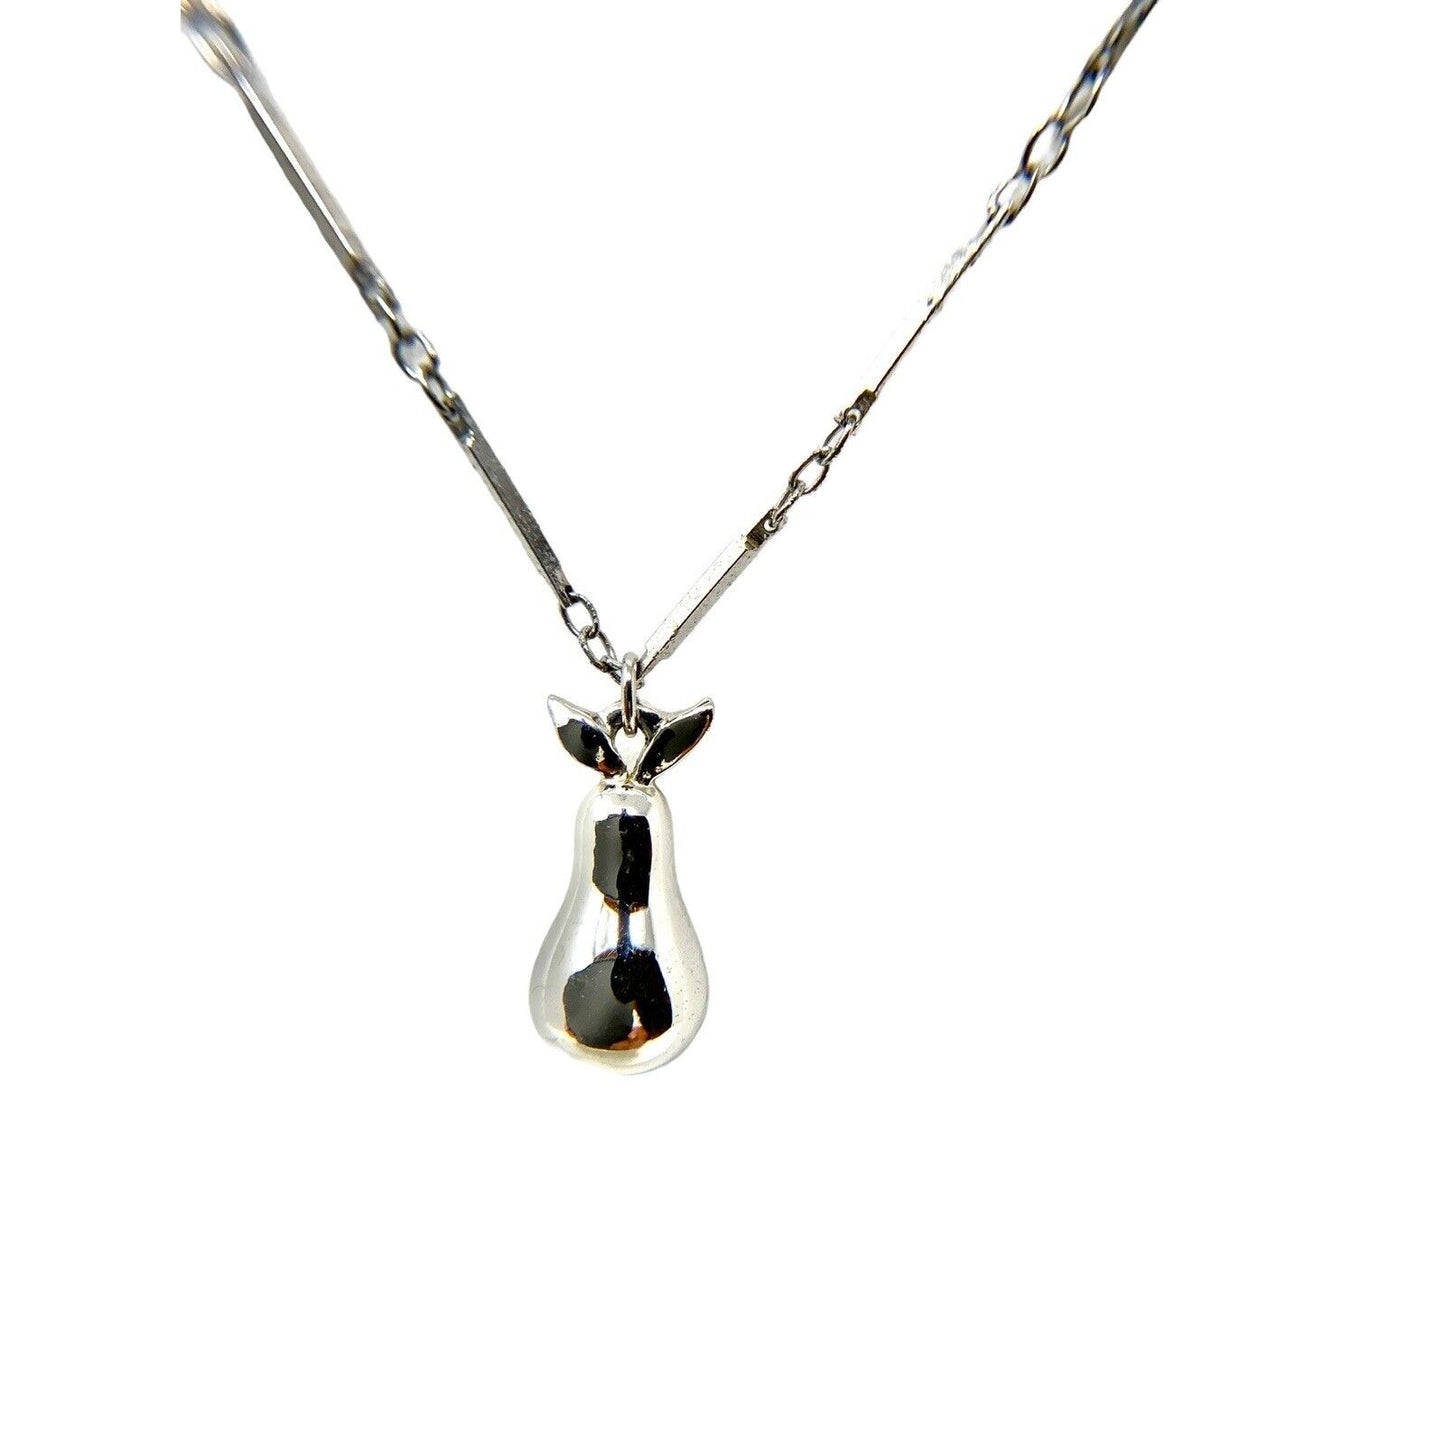 Silver-Tone Pear Shaped Pendant Necklace